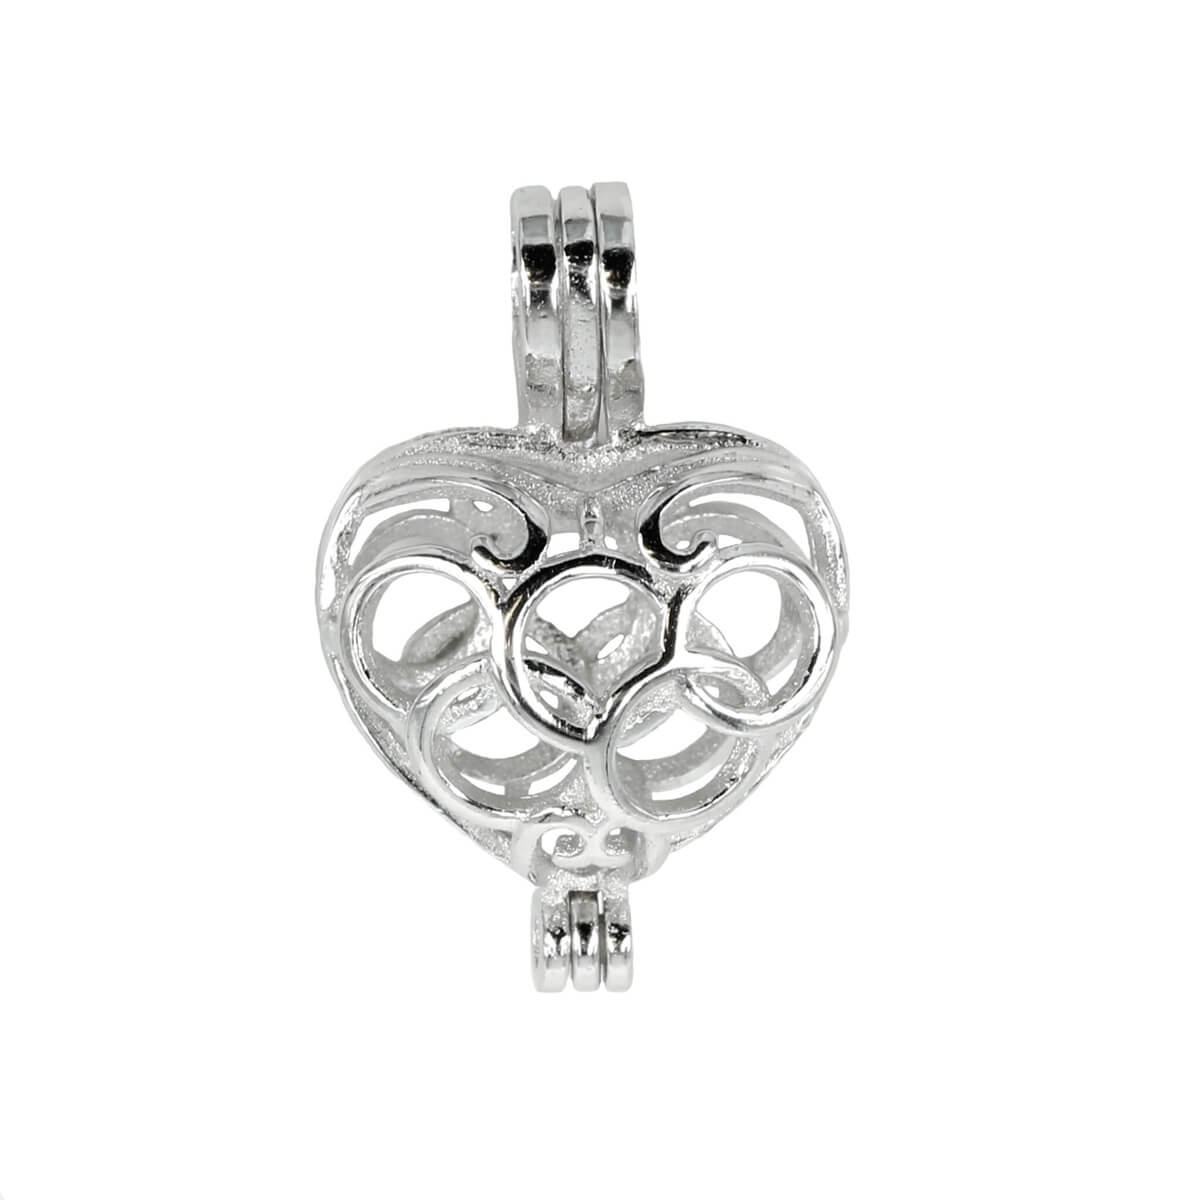 Heart Cage Pendant with Incorporated Bail in Sterling Silver 10mm